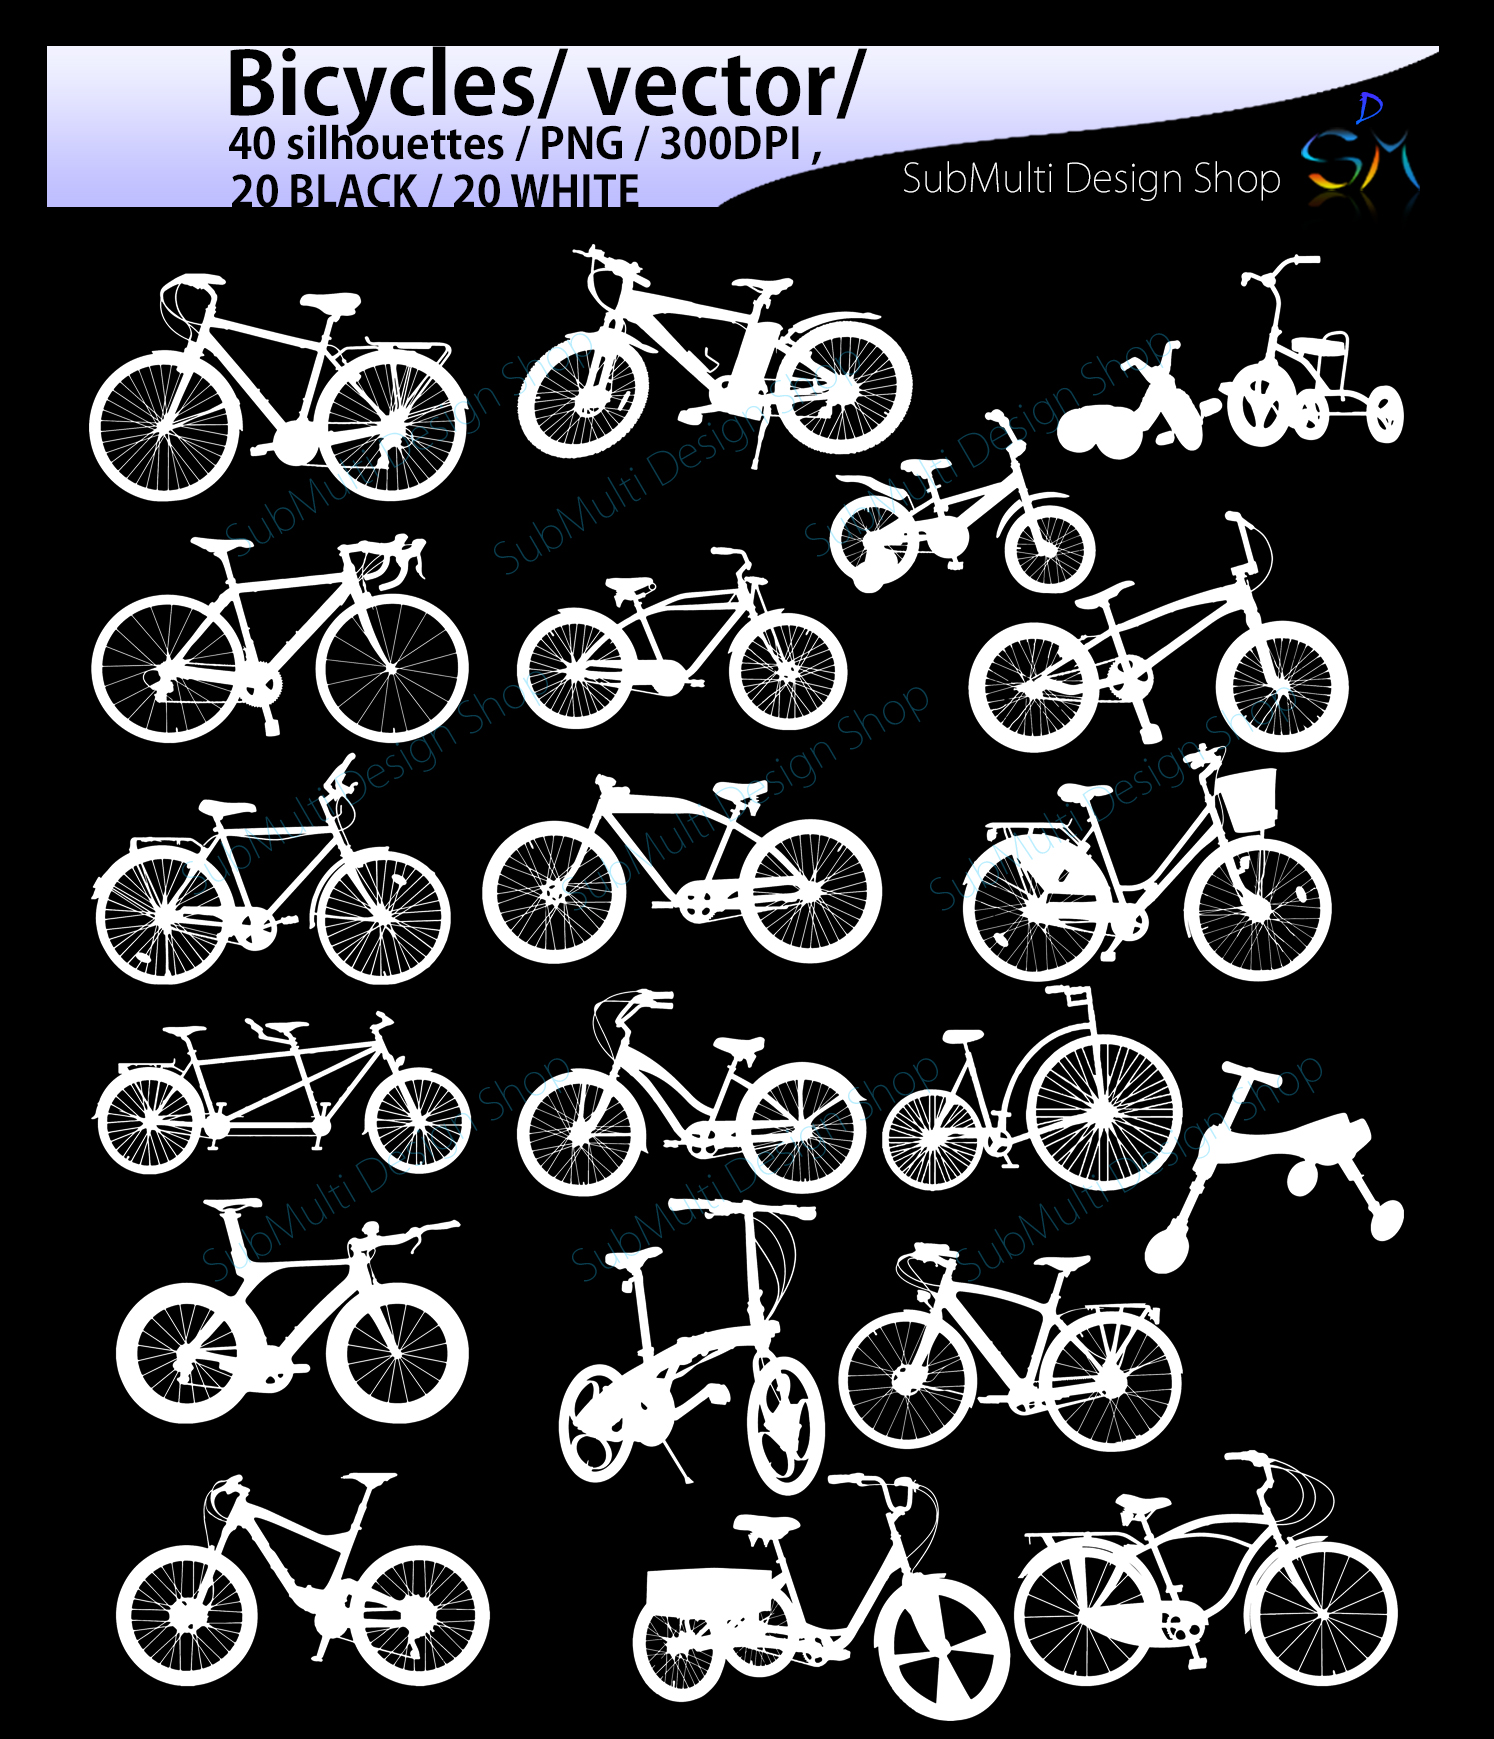 Download bicycle silhouette svg / Bicycles / bicycle / bicycle ...